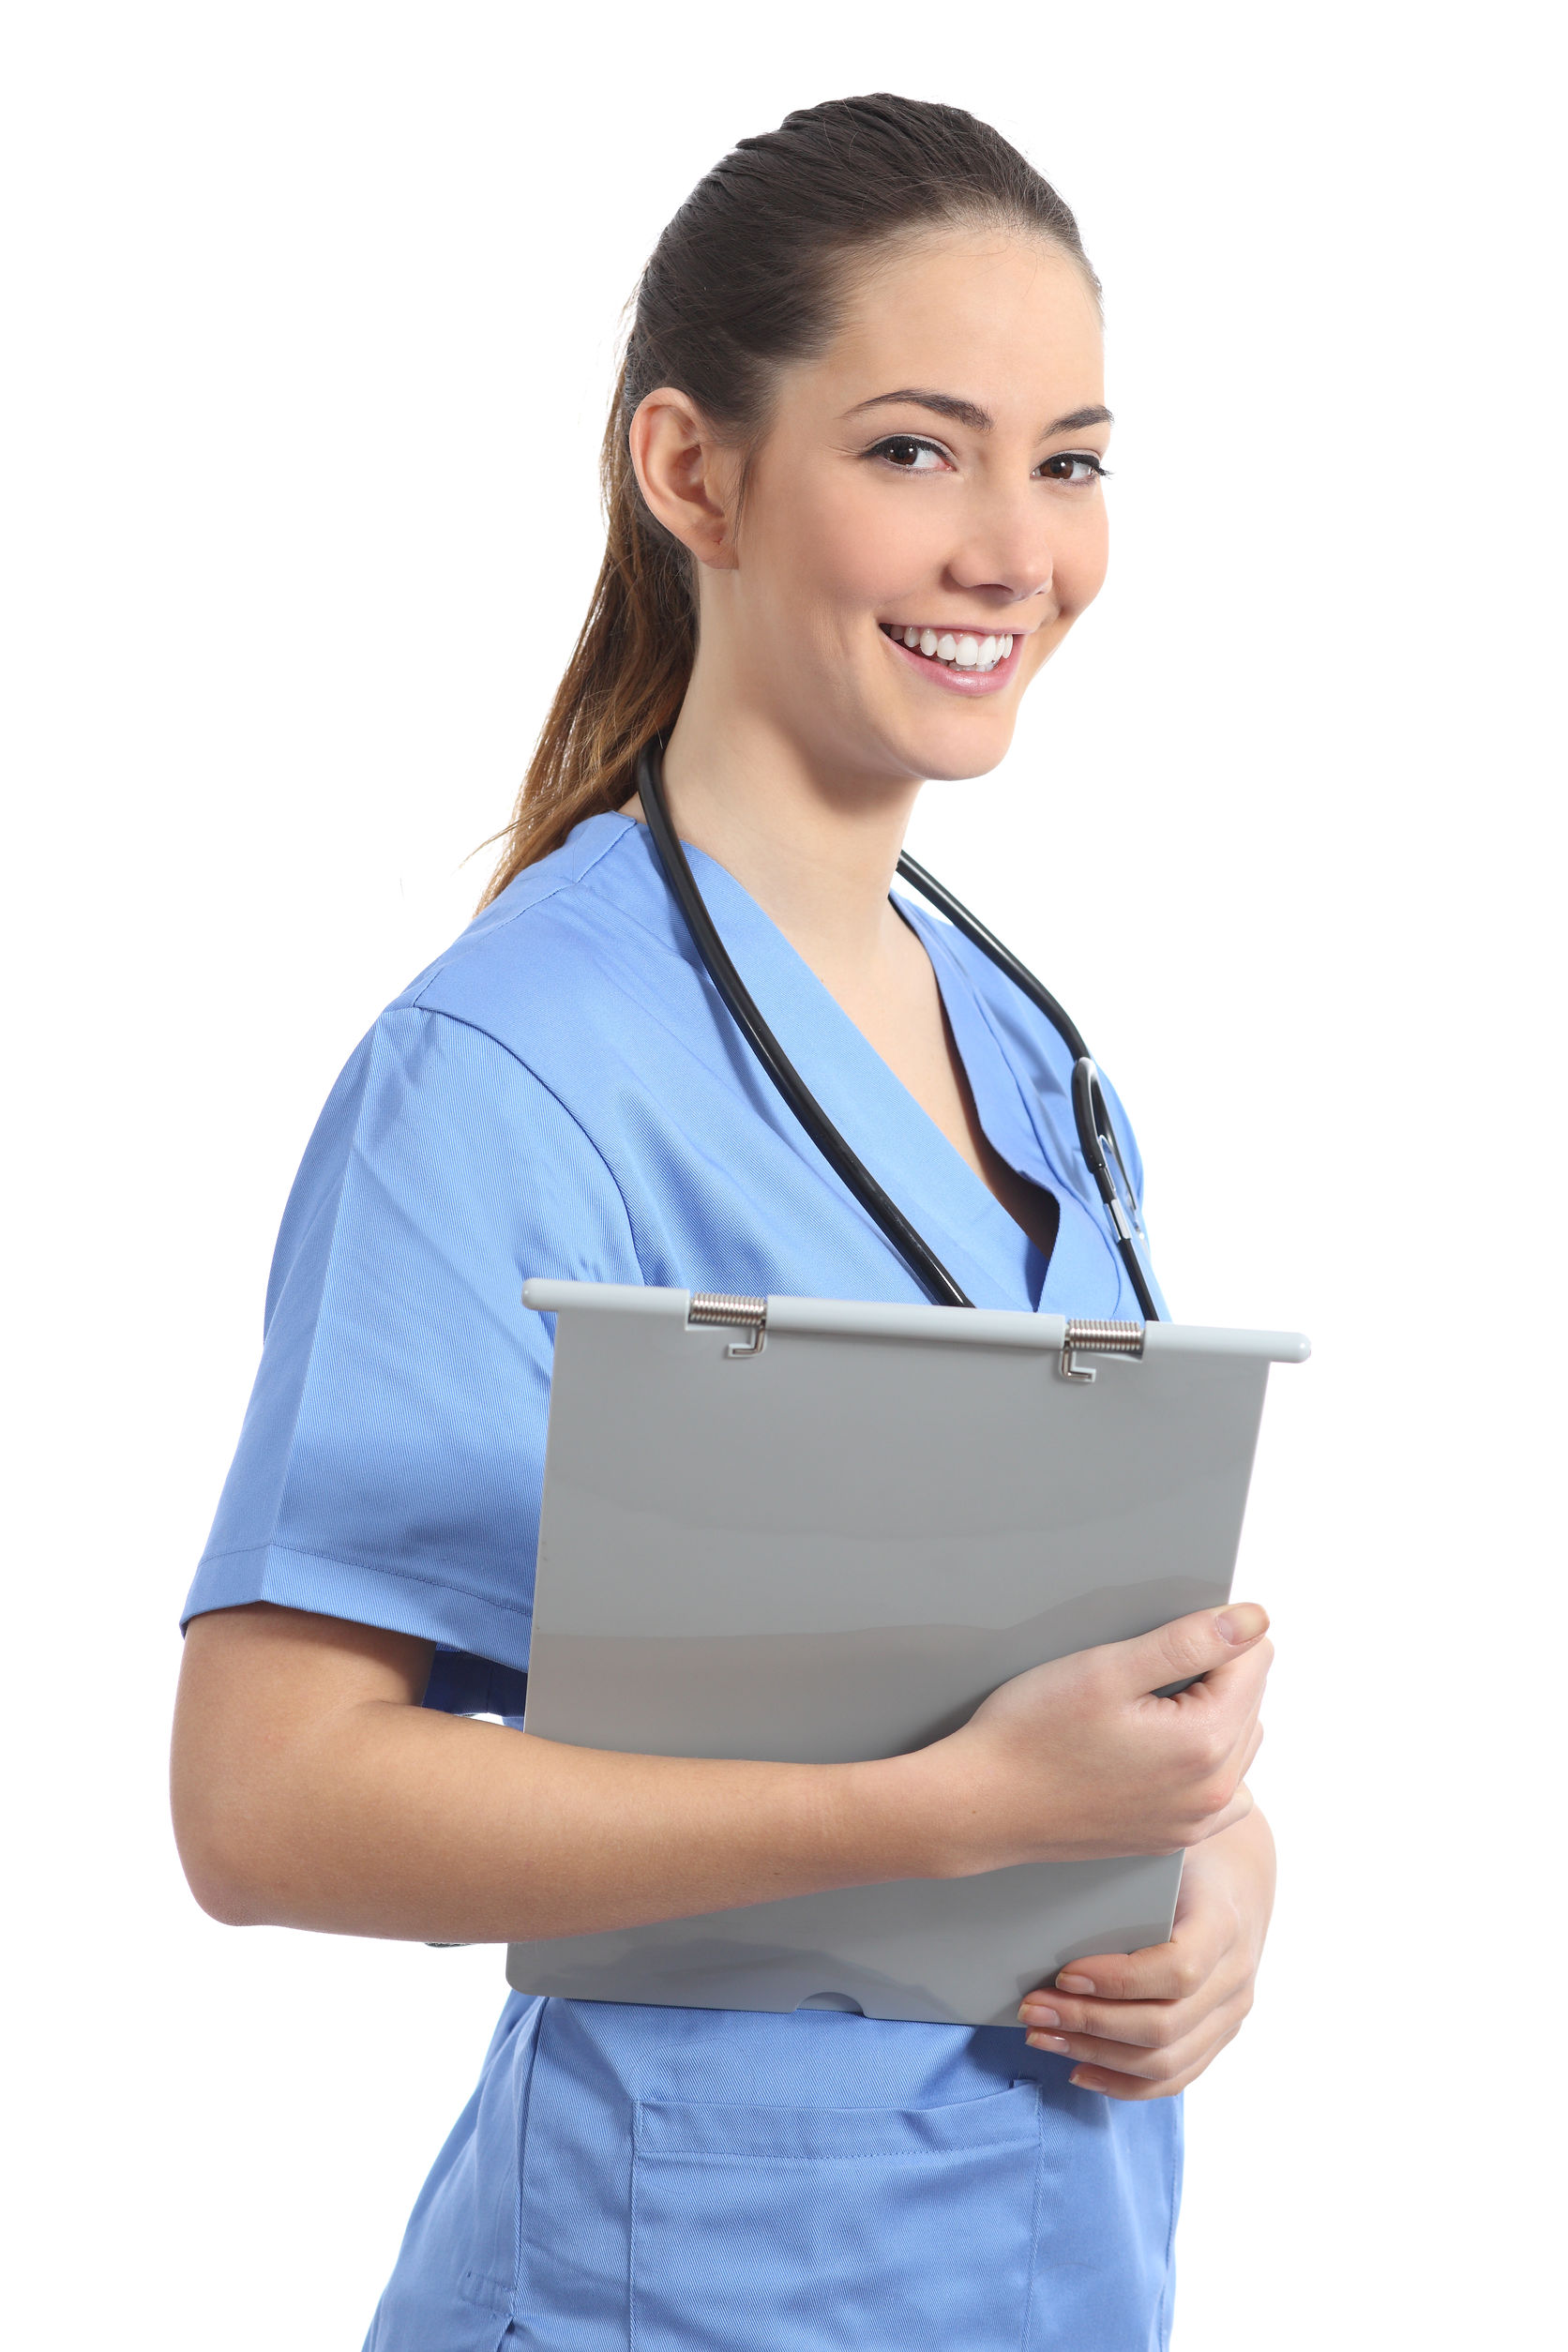 part time cna jobs in hospitals near me